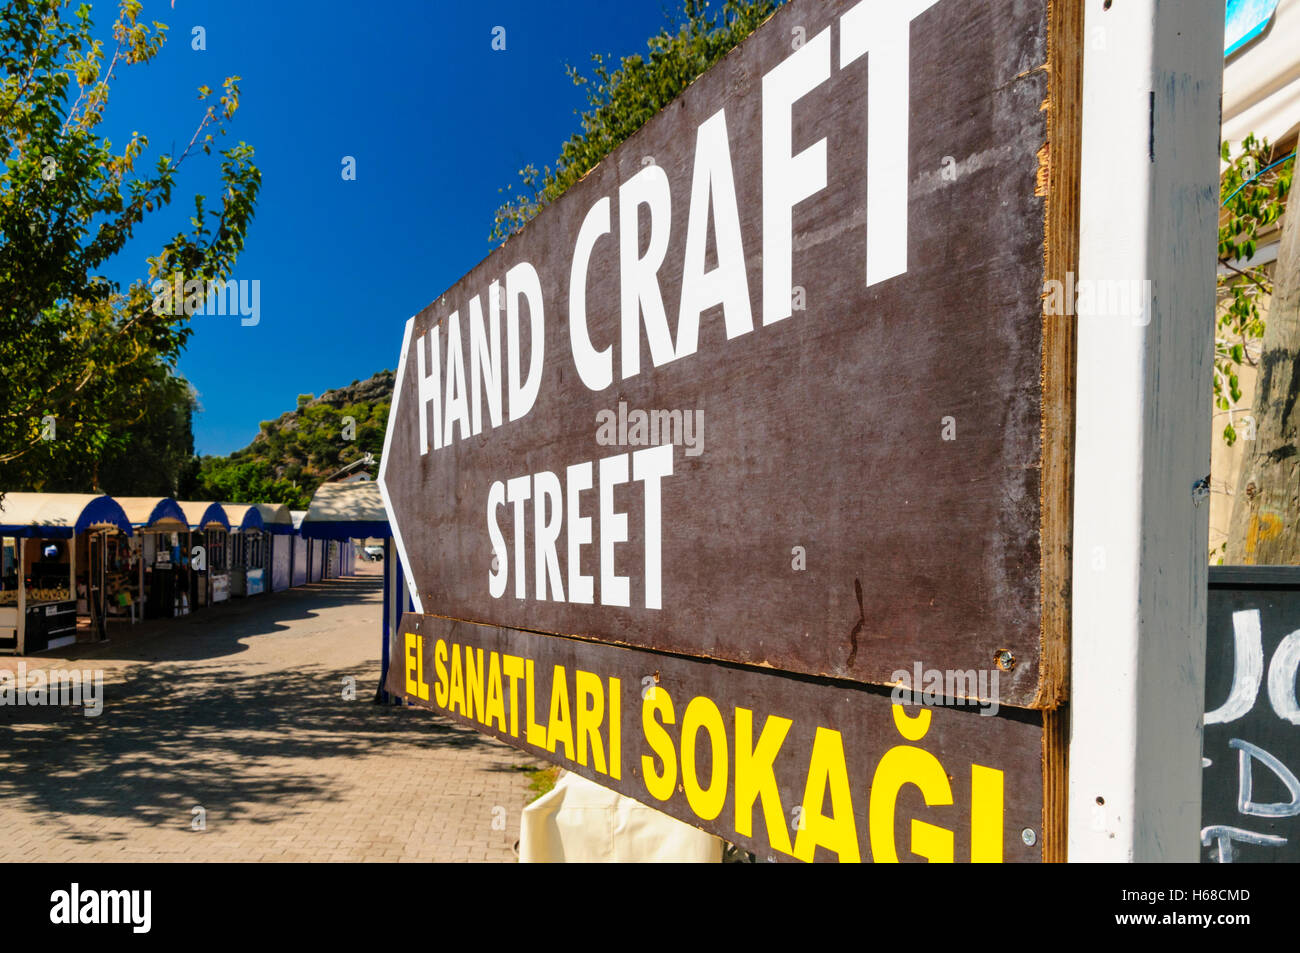 Sign for 'Hand Craft Street' in Oludeniz, Turkey in English and Turkish Stock Photo